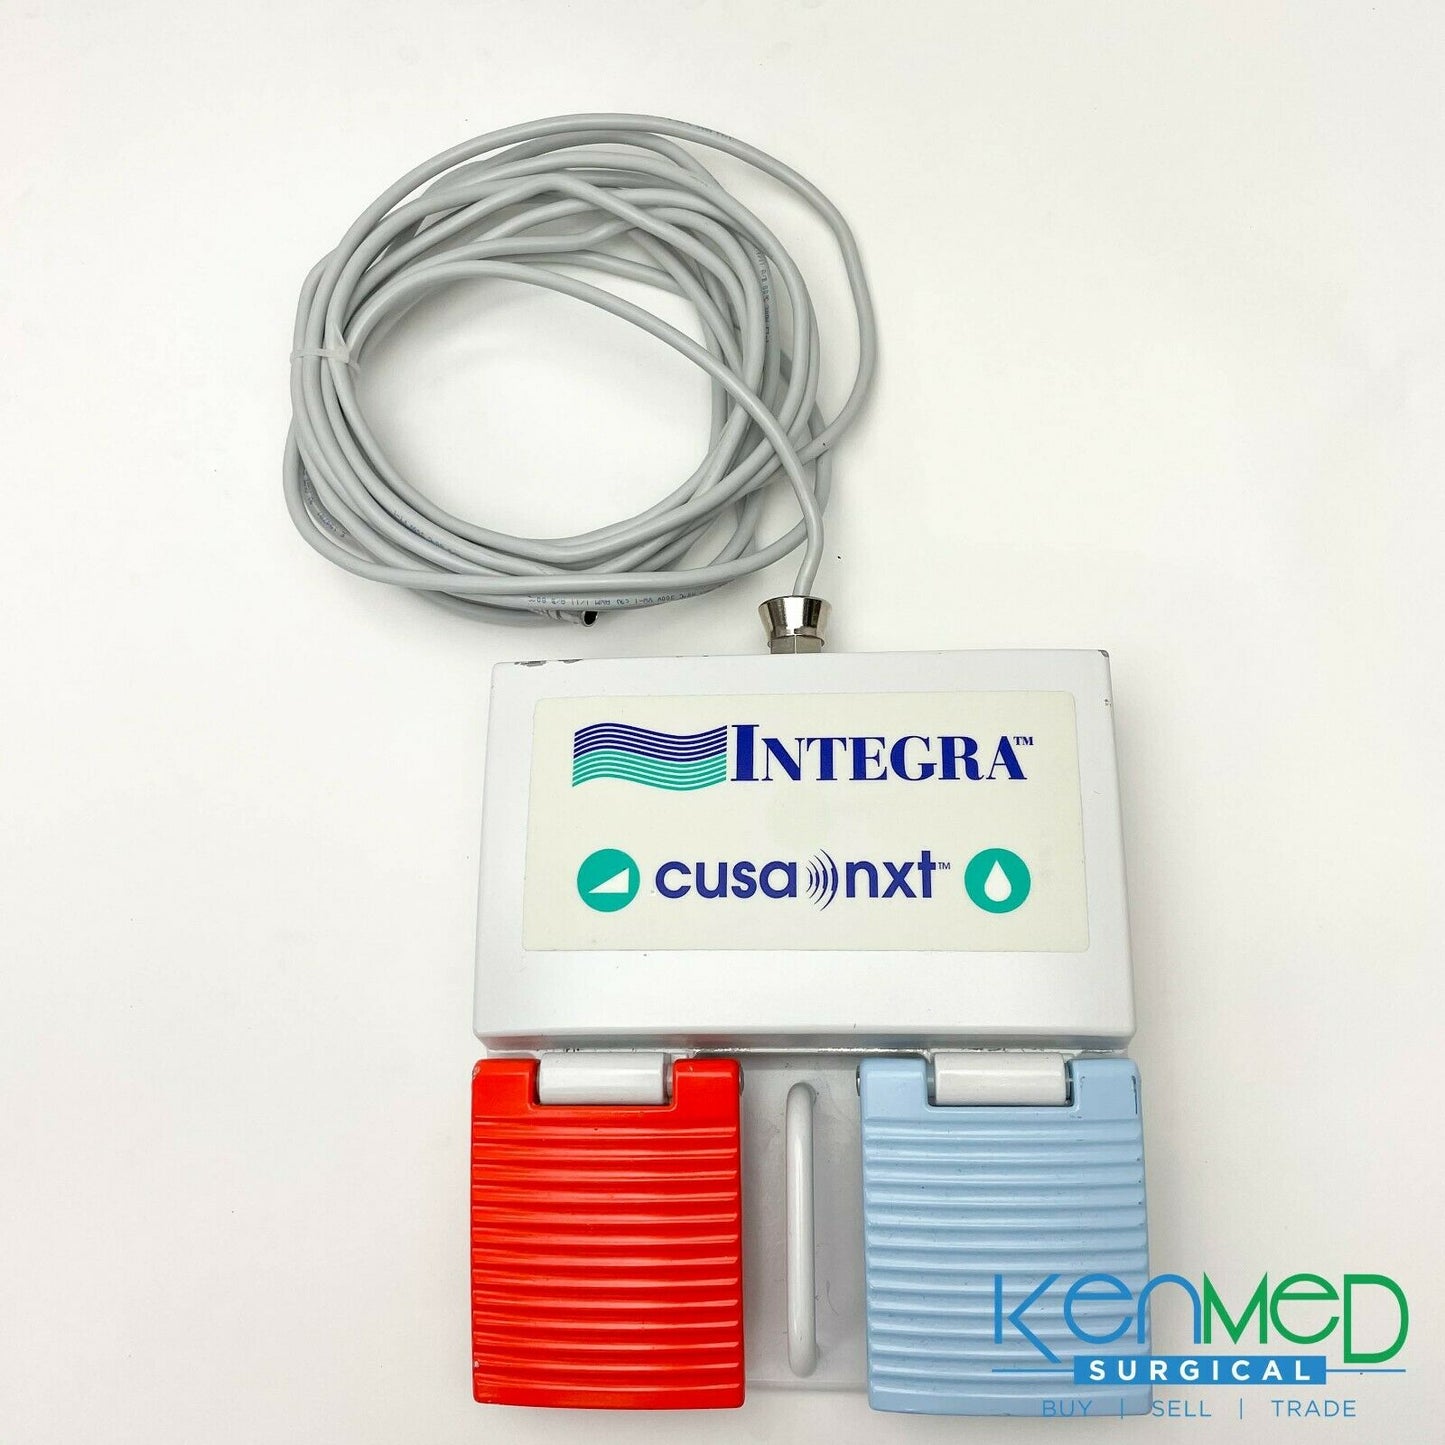 Integra CUSA NXT Ultrasonic Surgical Aspirator System and Foot Pedal